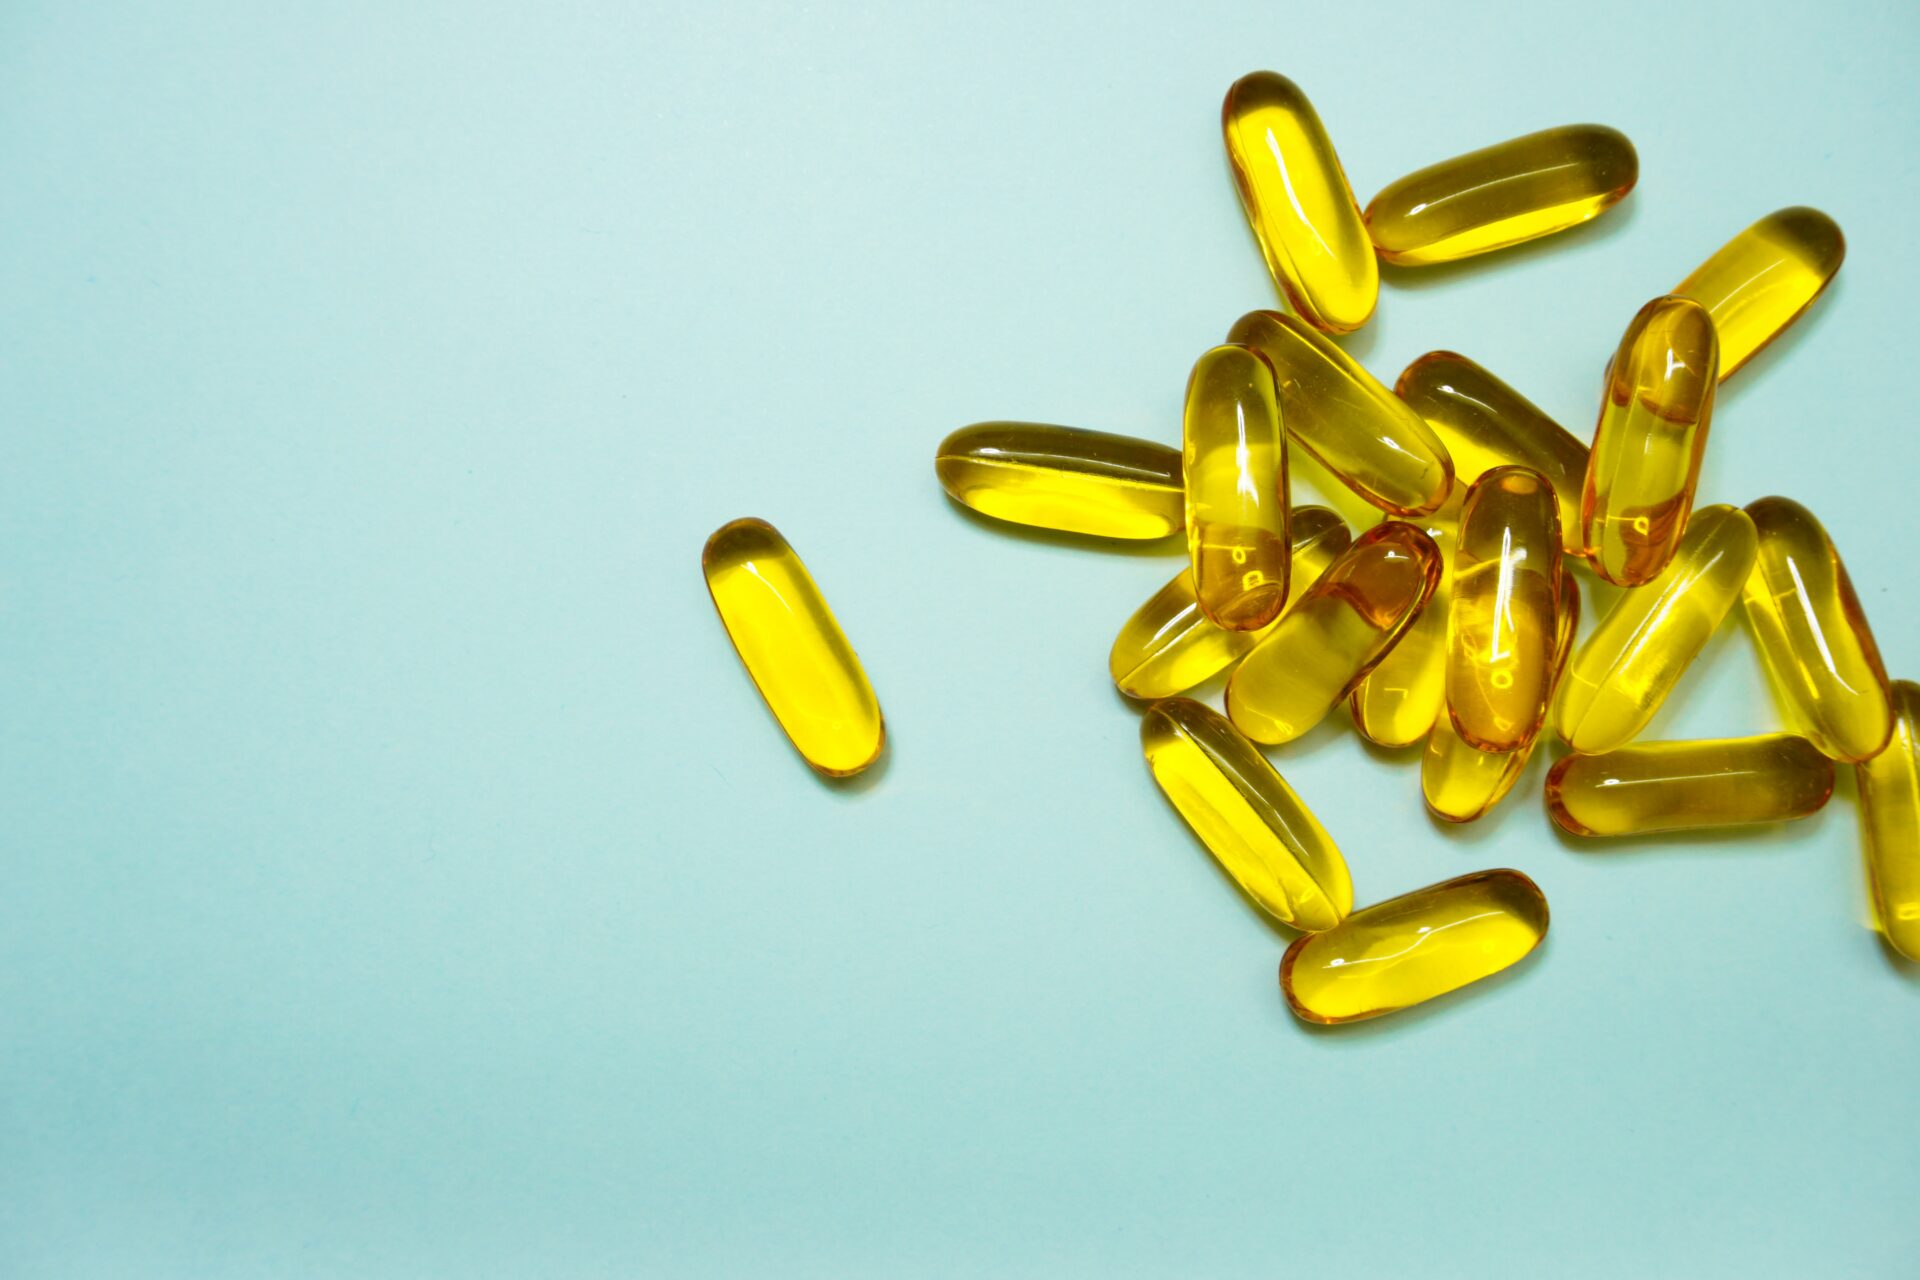 Pile of transparent yellow vitamin capsules on a blue background